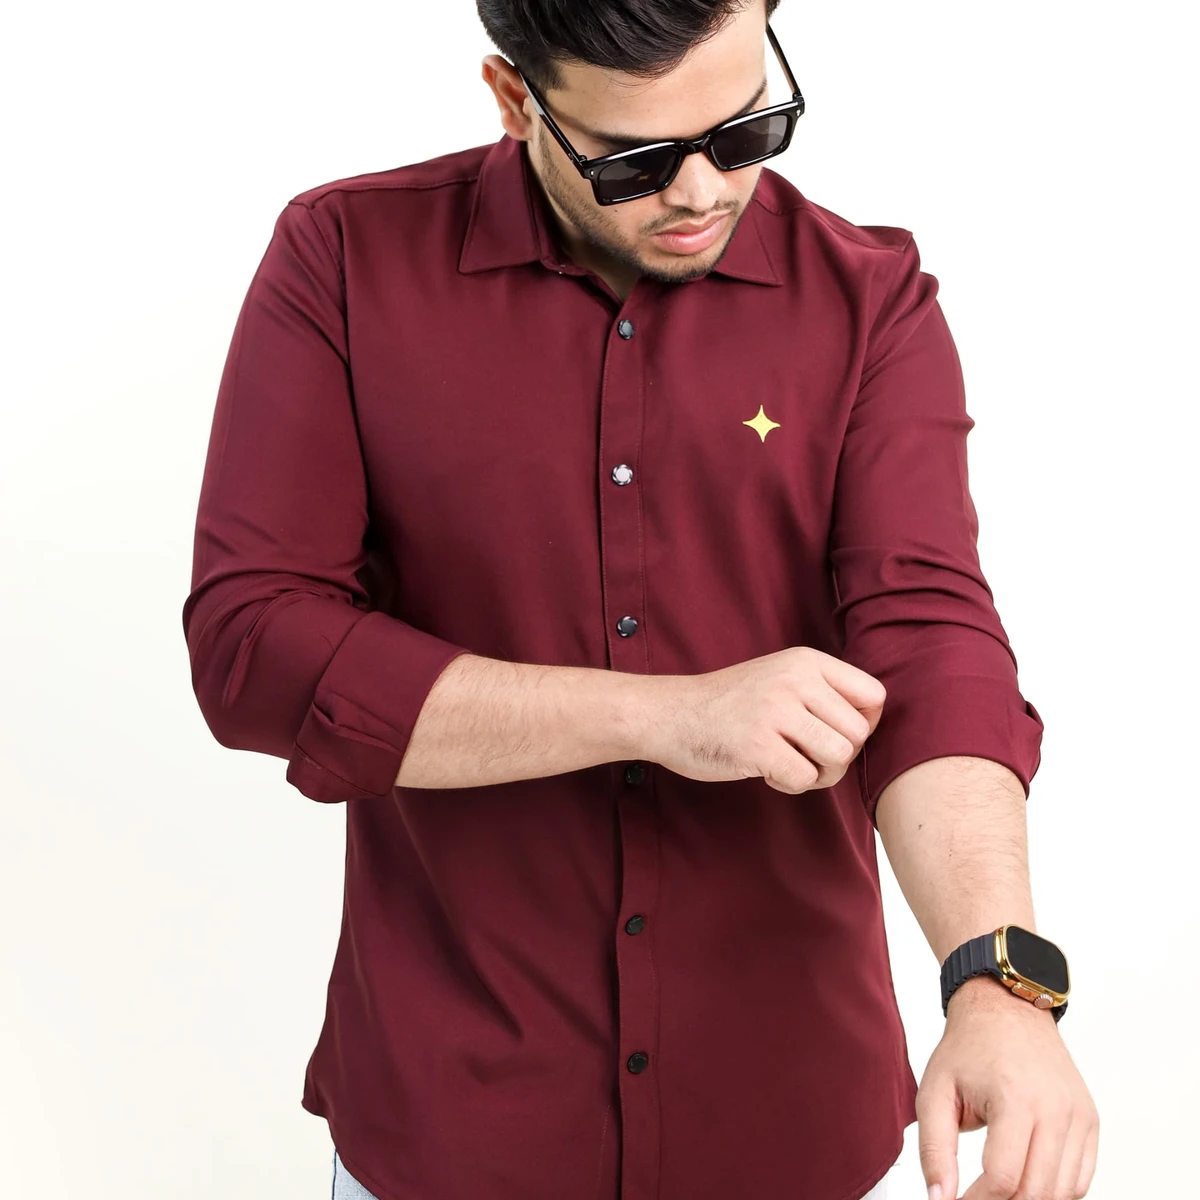 Solide Colour Full Sleeve Casual Shirt - Maroon (Code-77)